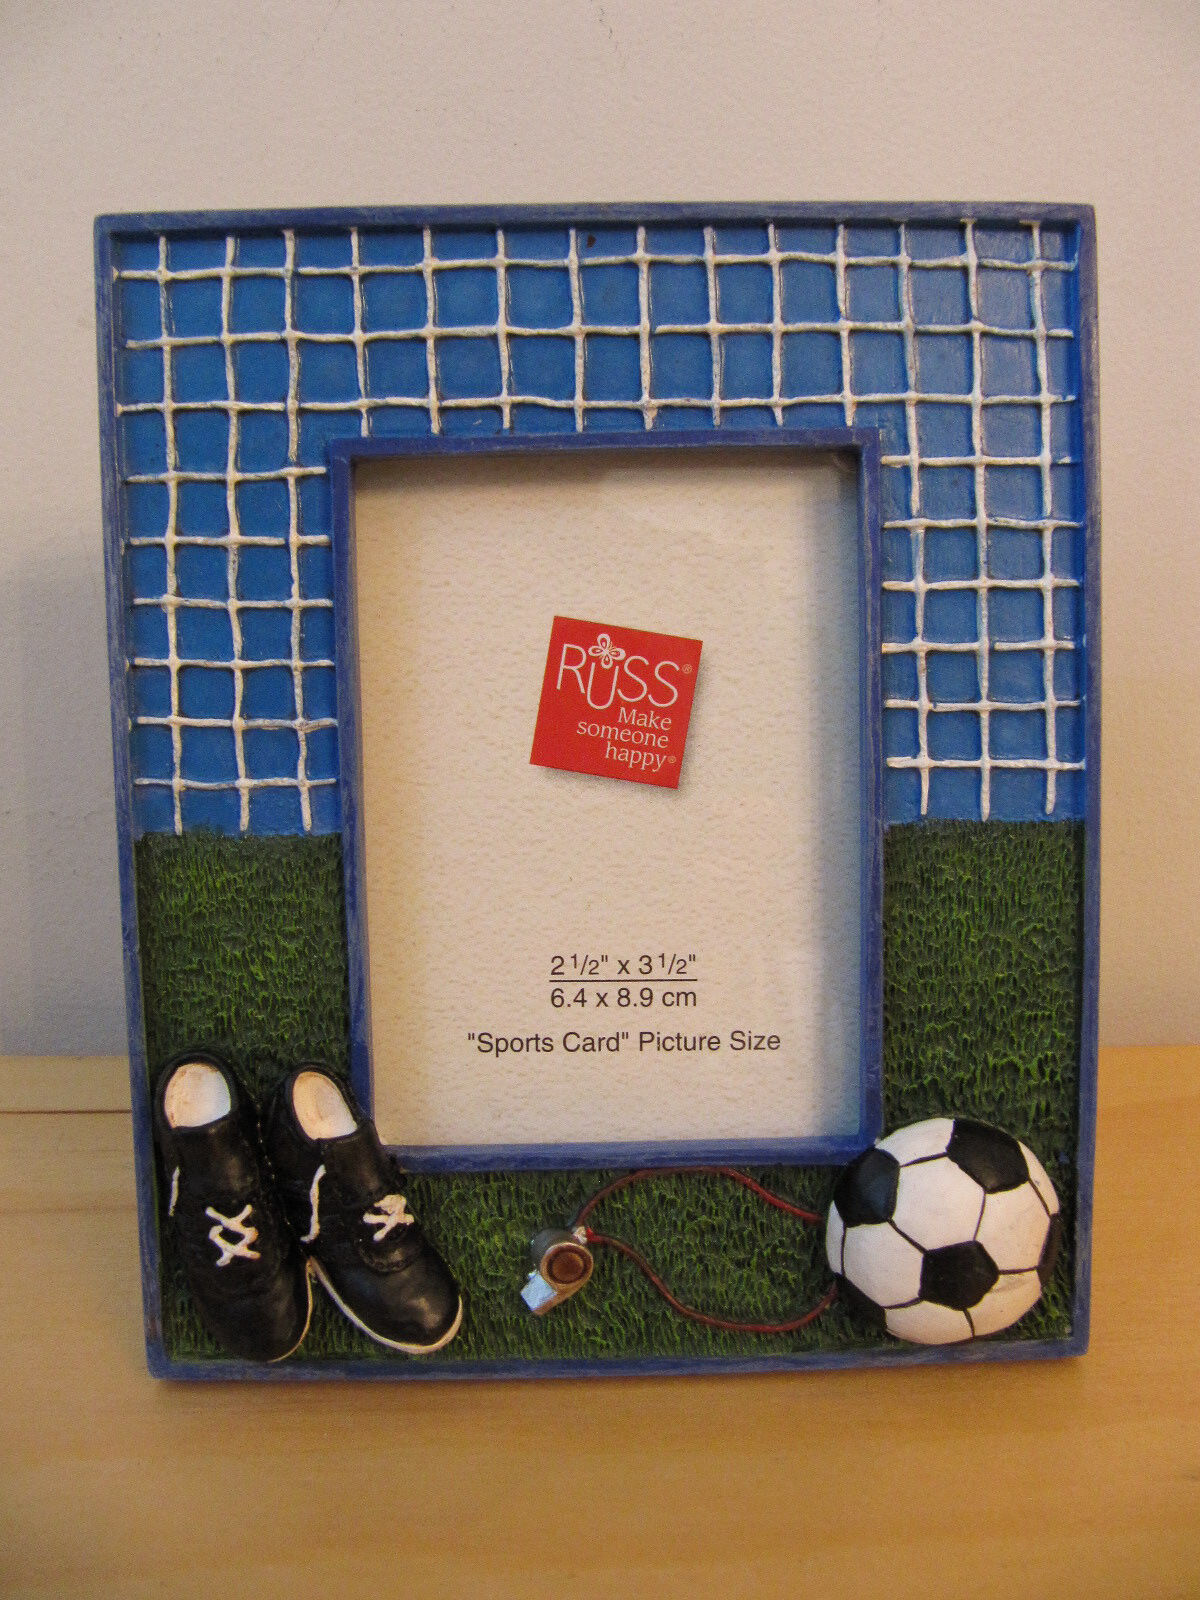 NEW Russ “Sports Page” 2.5 x 3.5 Handpainted Soccer Photo Frame #25839